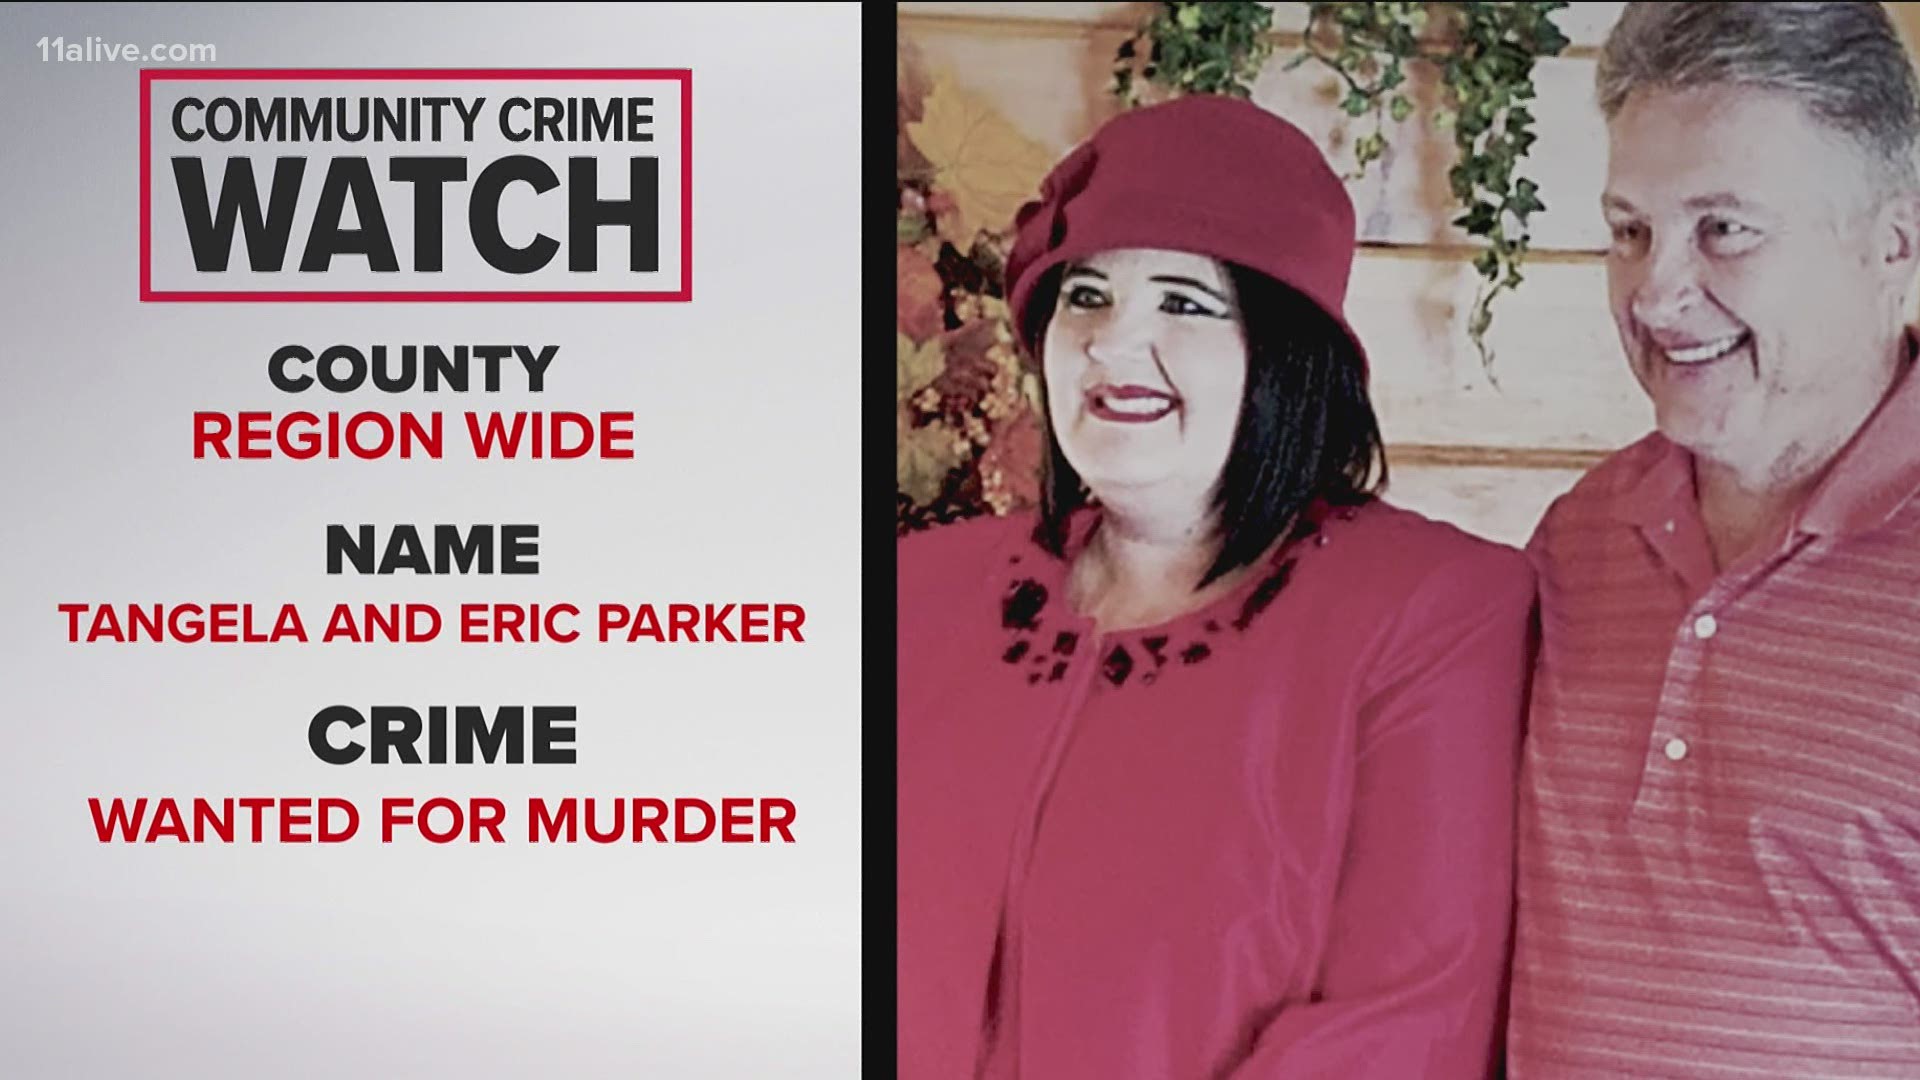 Up Late's Ron Jones highlights the case on this week's Community Crime Watch.